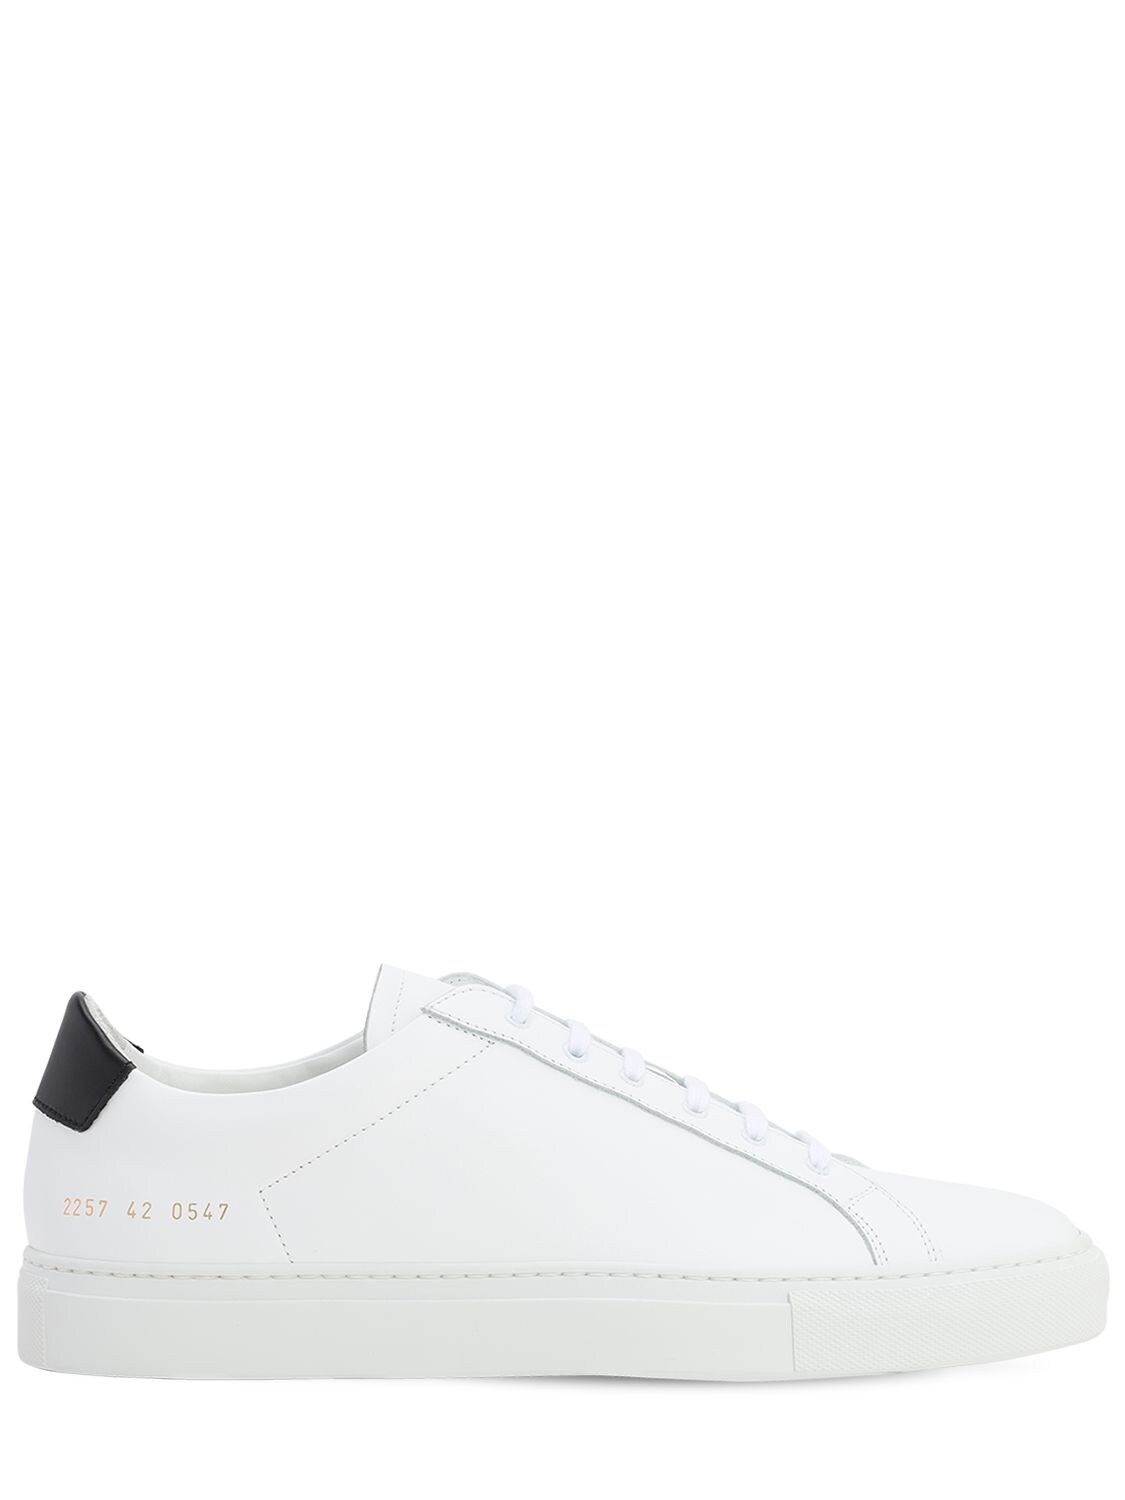 COMMON PROJECTS “RETRO”低帮皮革运动鞋,71I3J4005-MDU0NW2